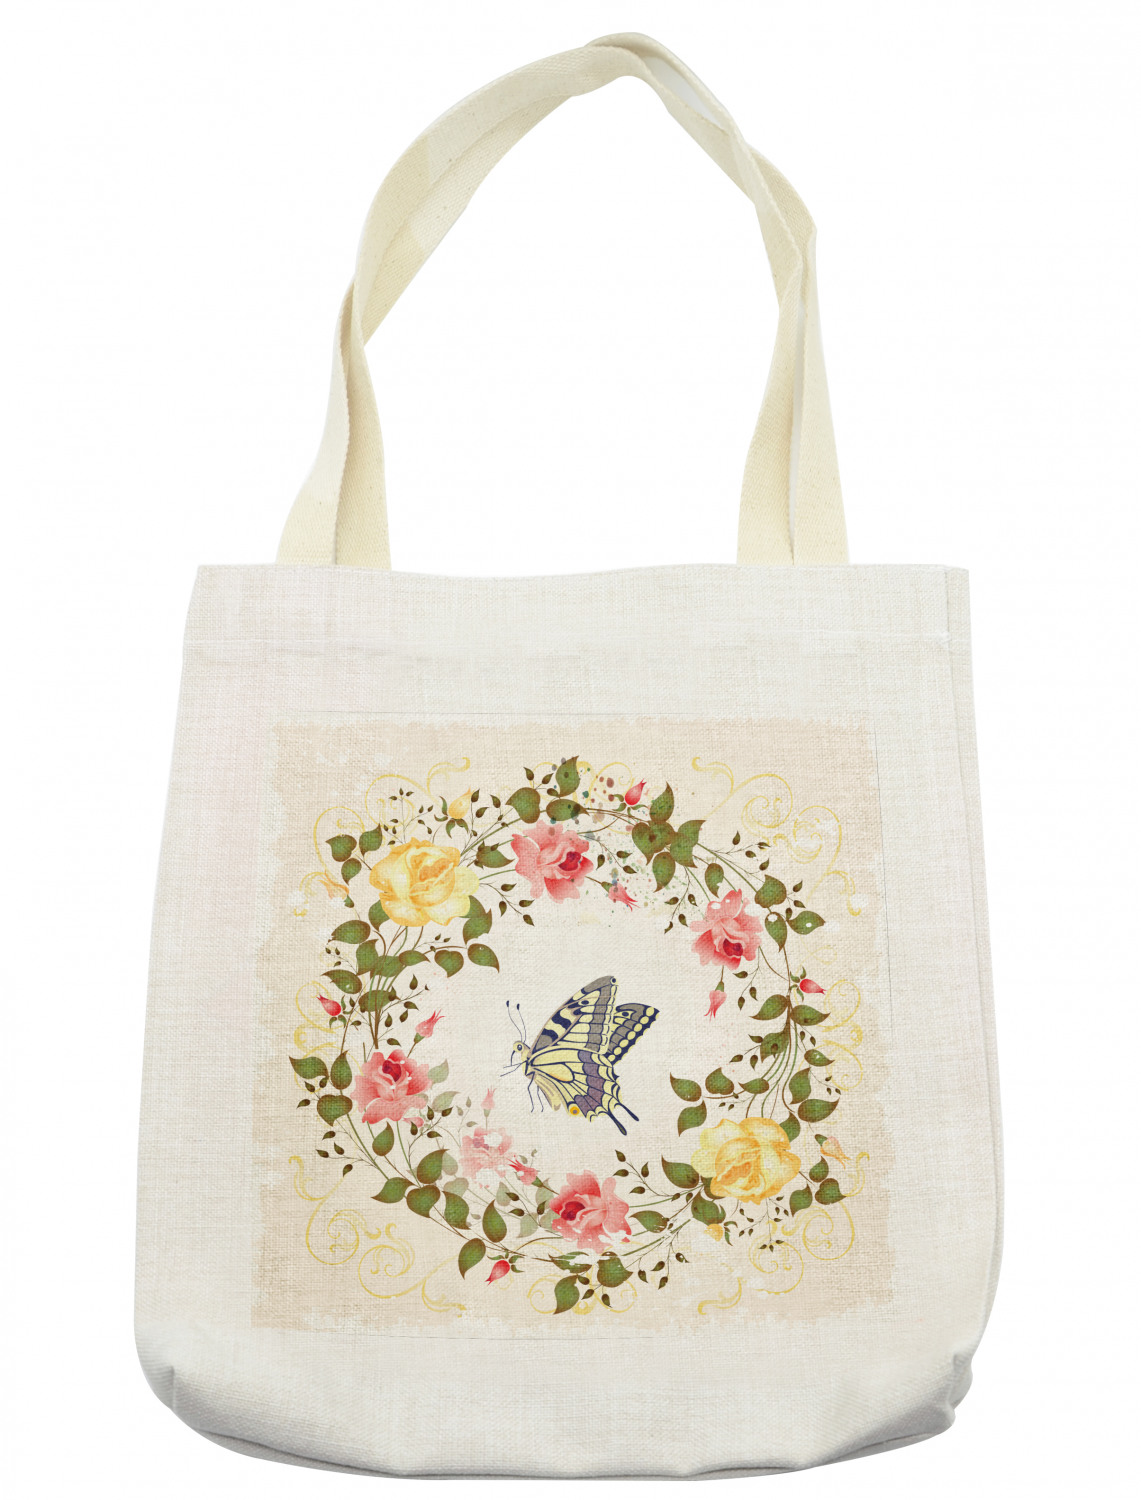 Vintage linen tote bag in faded roses with embroidered handles